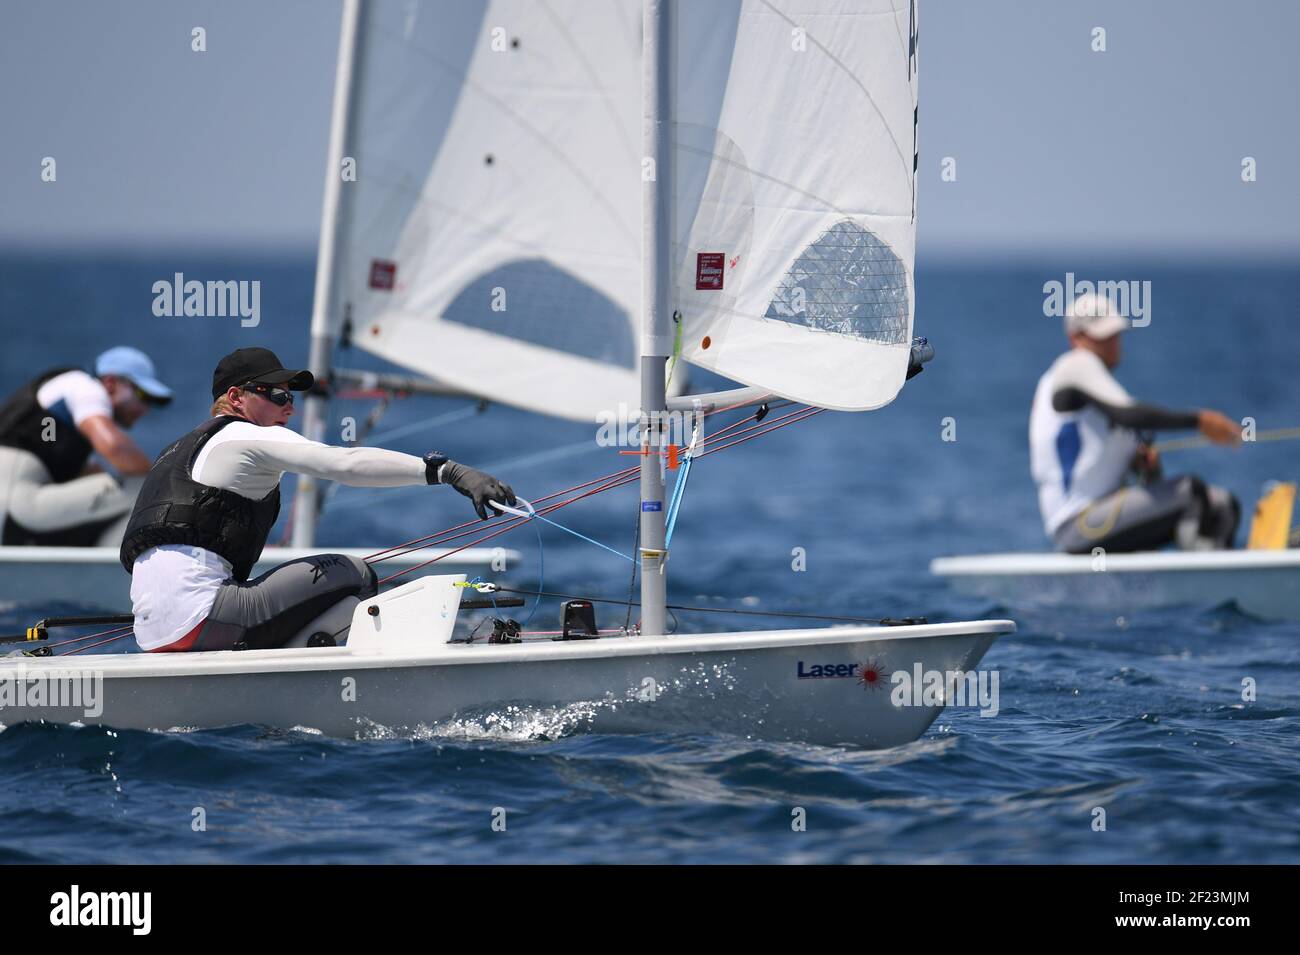 Alexandre Boite (FRA) competes on Sailing race Laser during the Jeux  Mediterraneens 2018, in Tarragona, Spain, Day 3, on June 24, 2018 - Photo  Stephane Kempinaire / KMSP / DPPI Stock Photo - Alamy